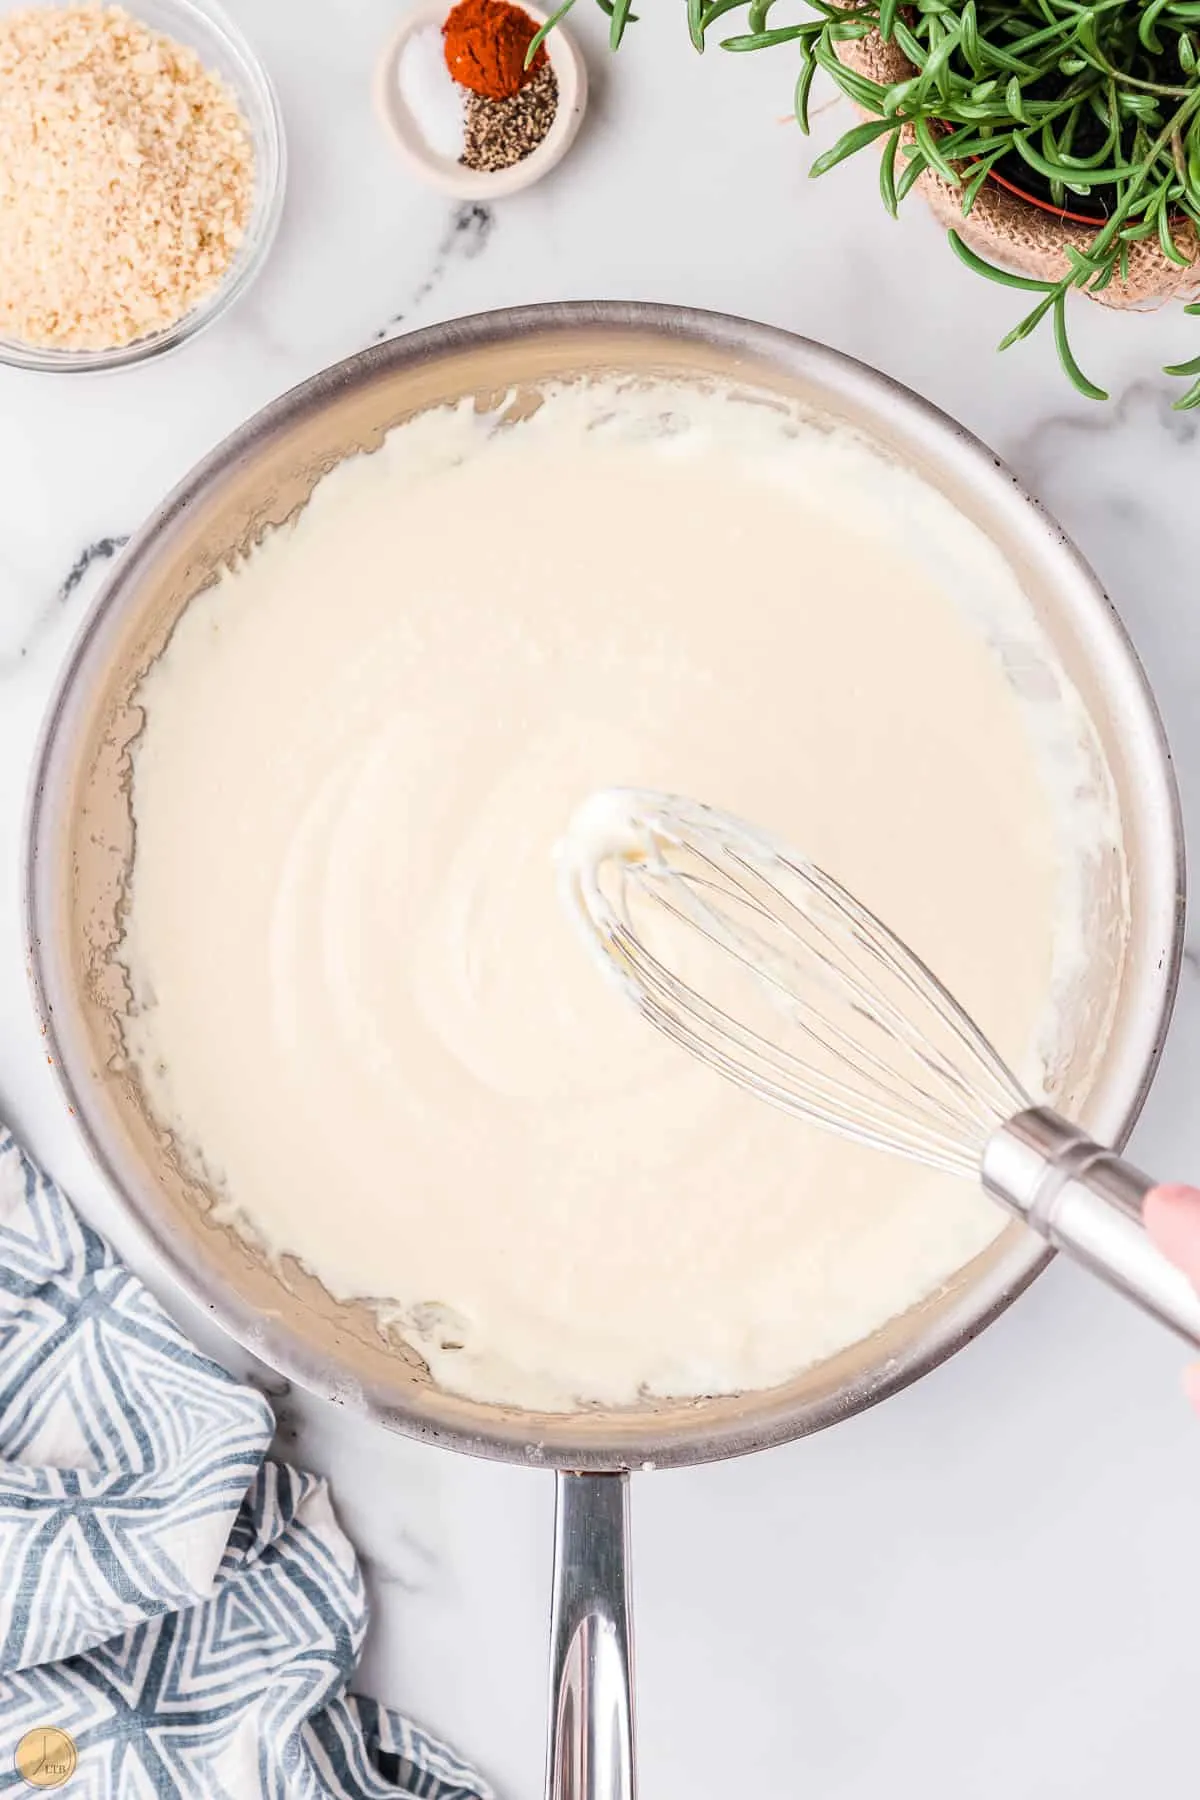 roux in a skillet with a whisk